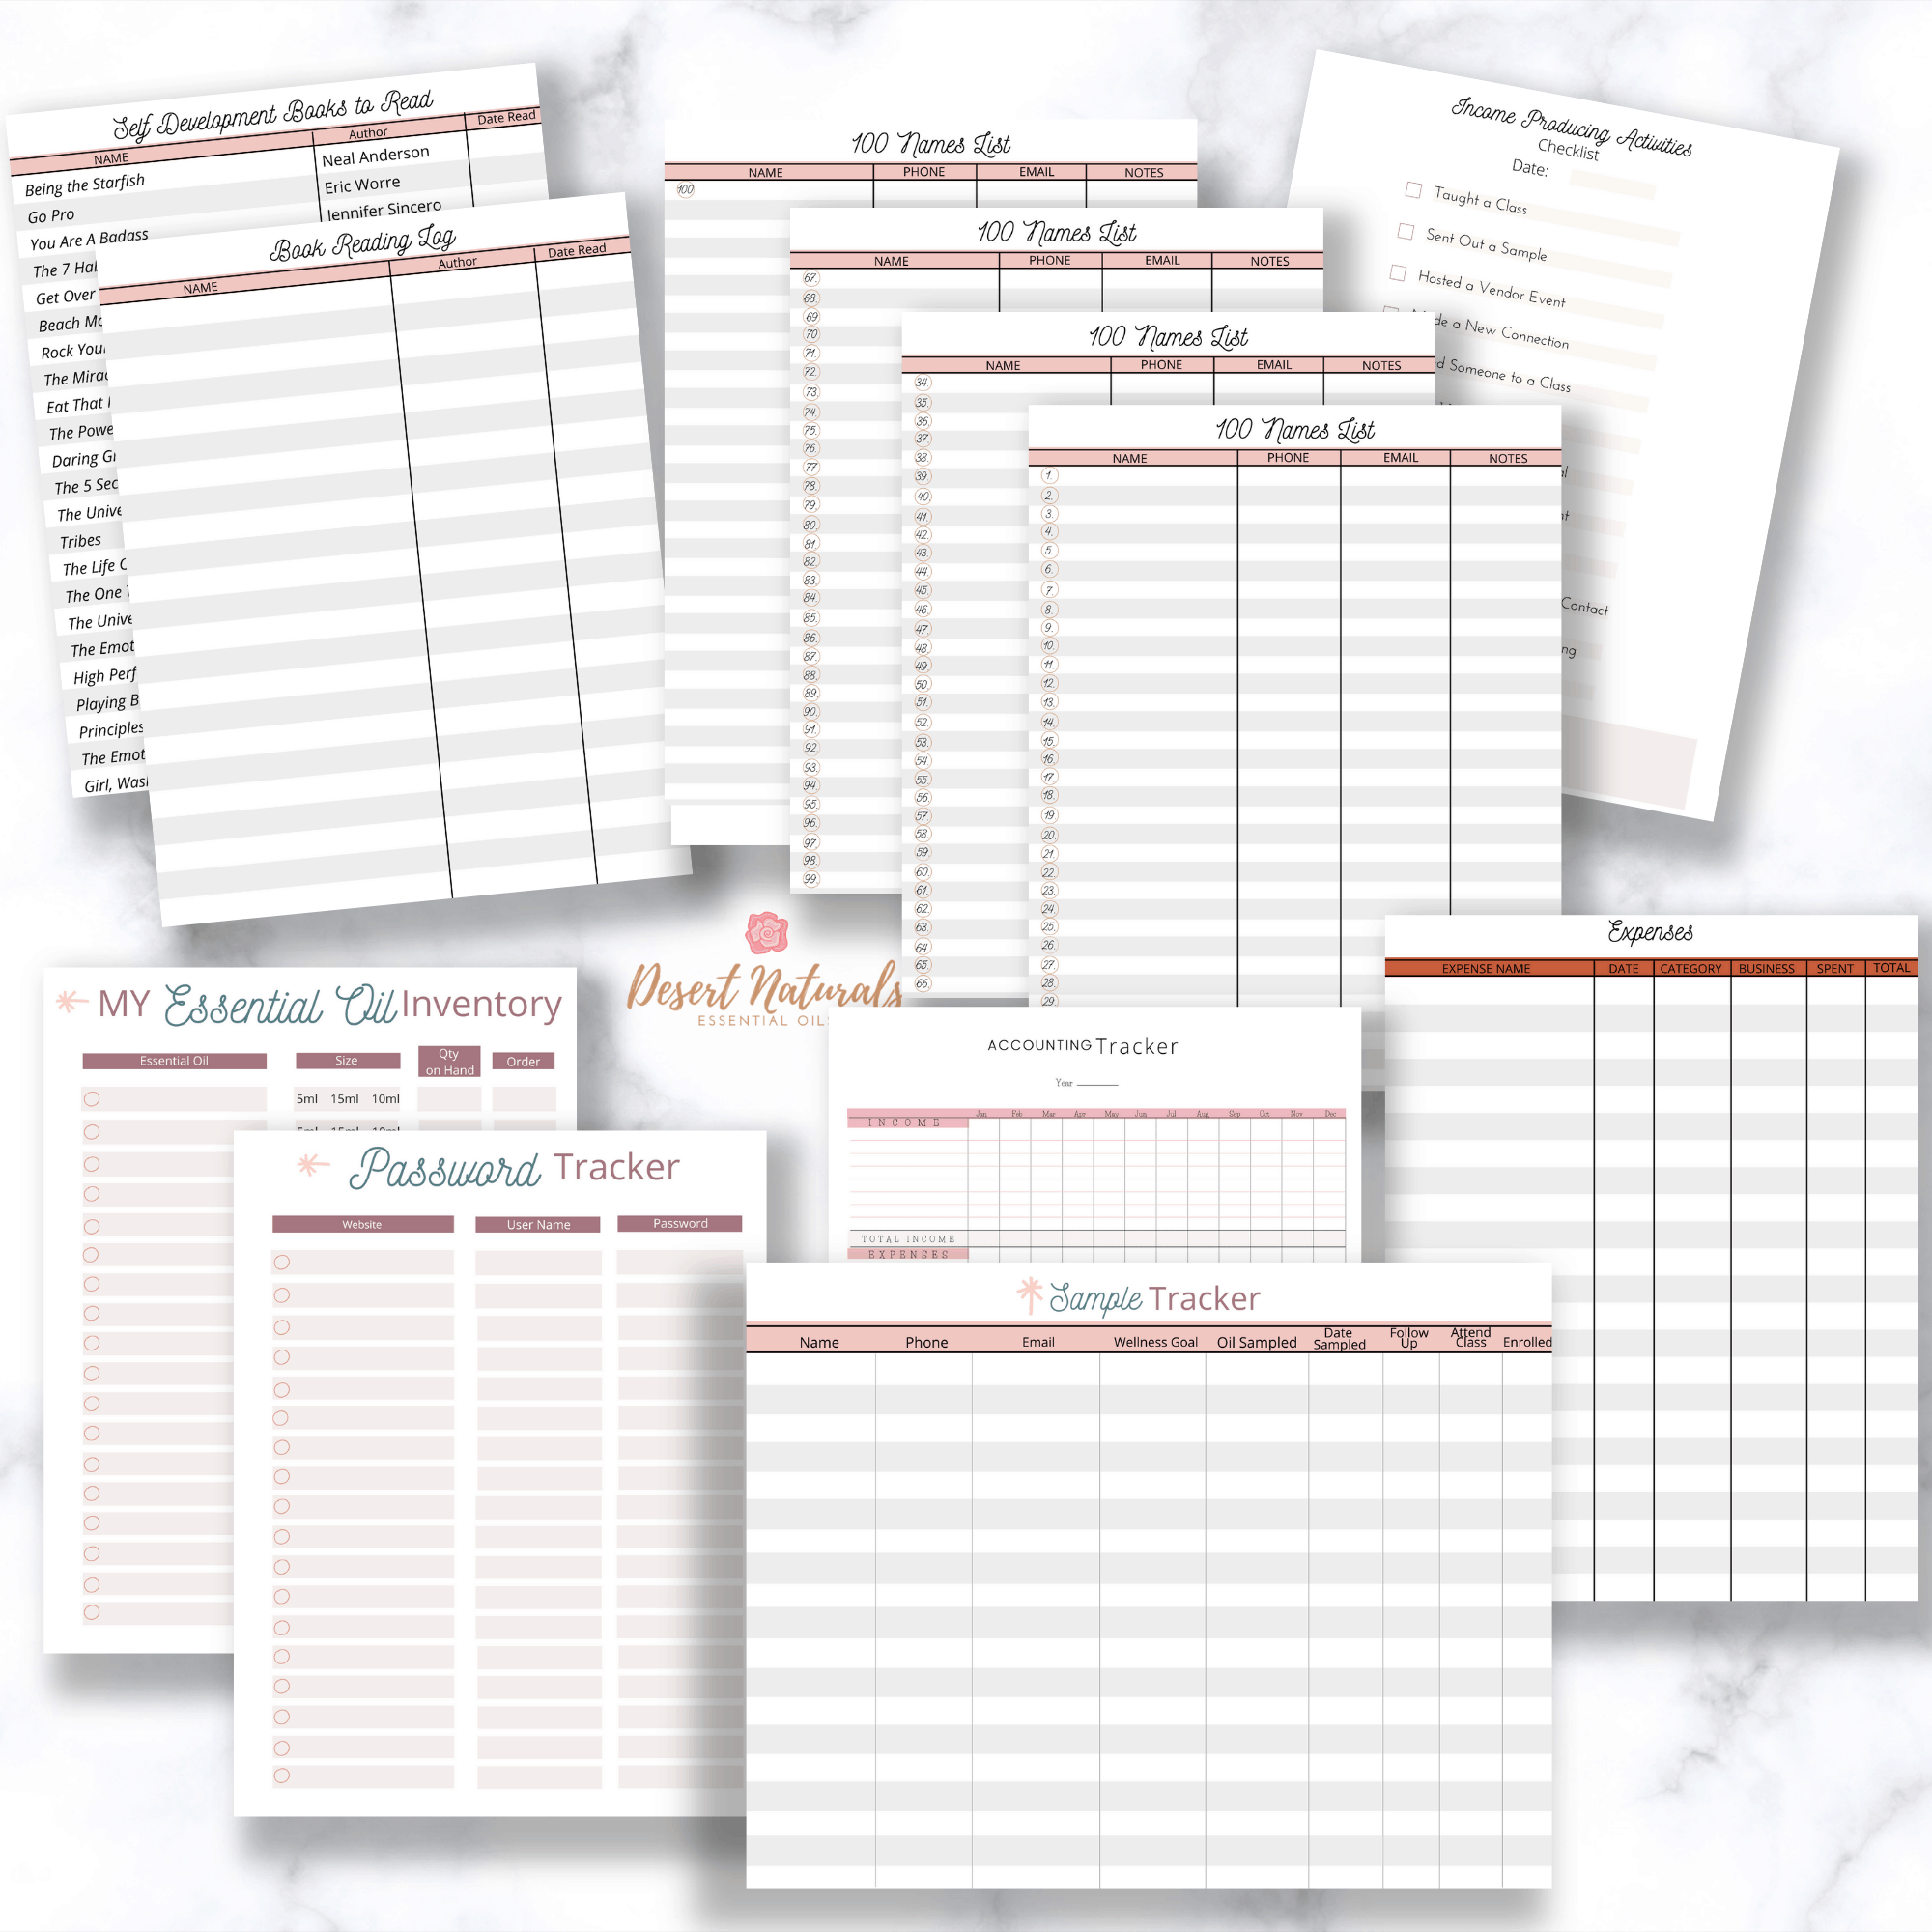 pages from the doterra business notebook including sample tracker